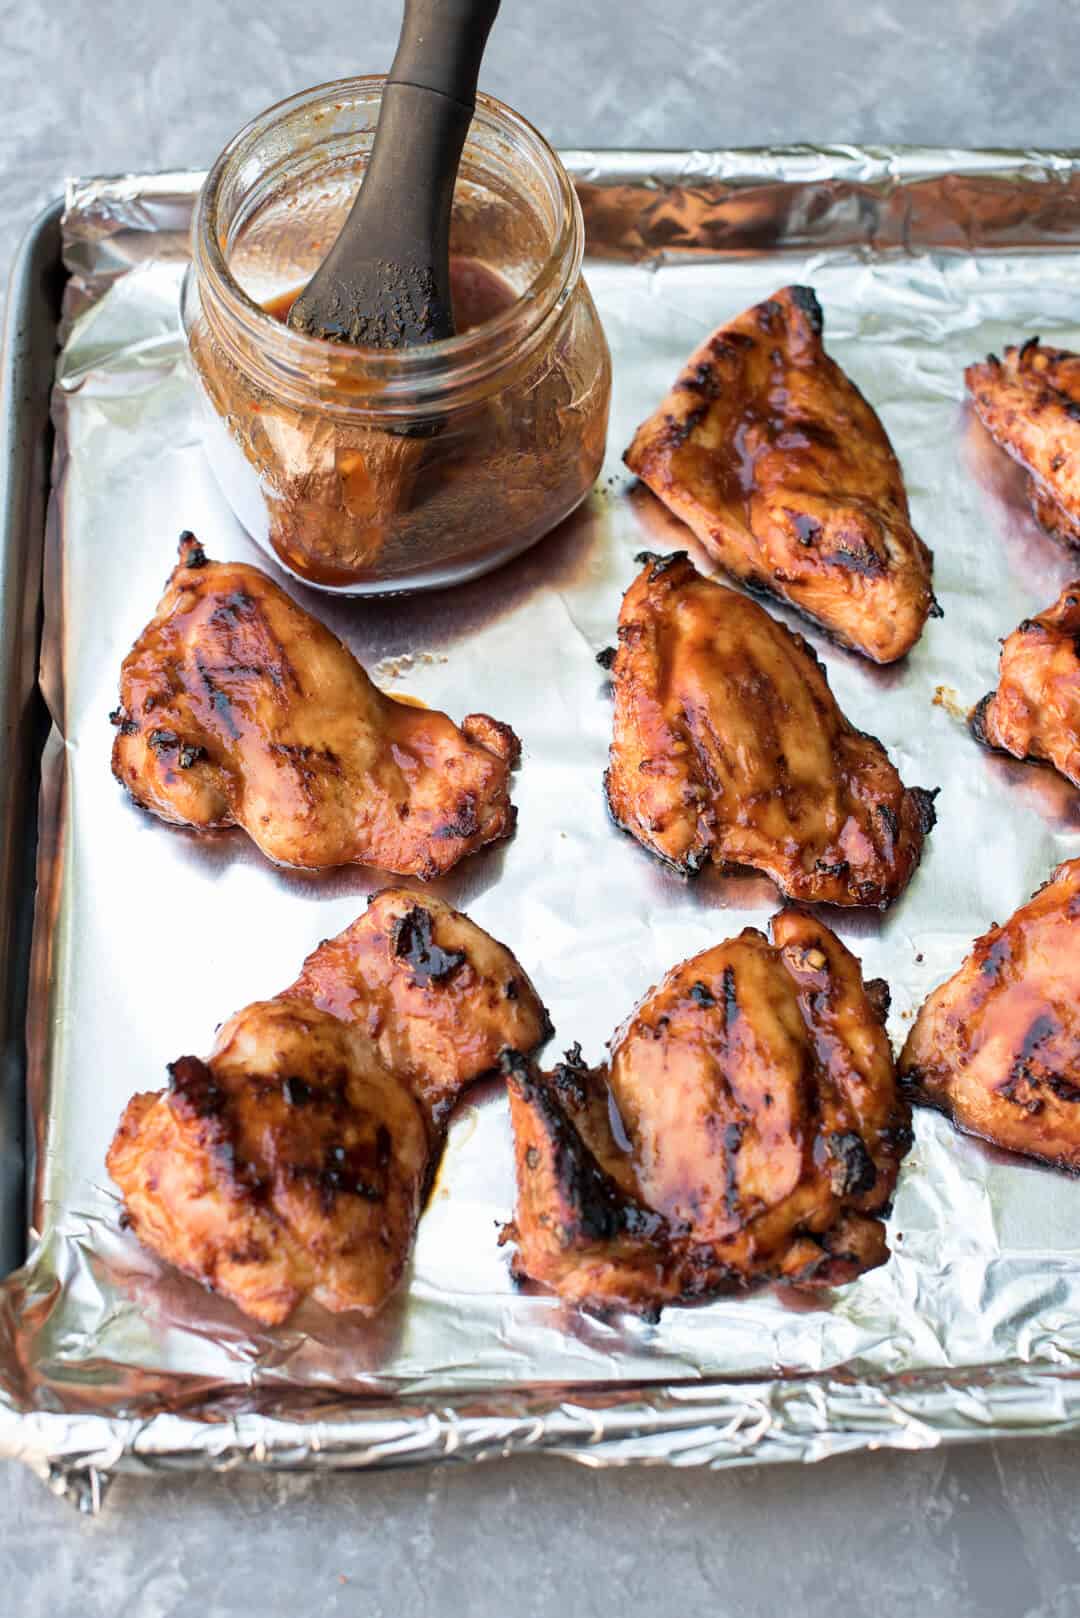 The grilled chicken on a foil lined baking sheet is basted with sauce.